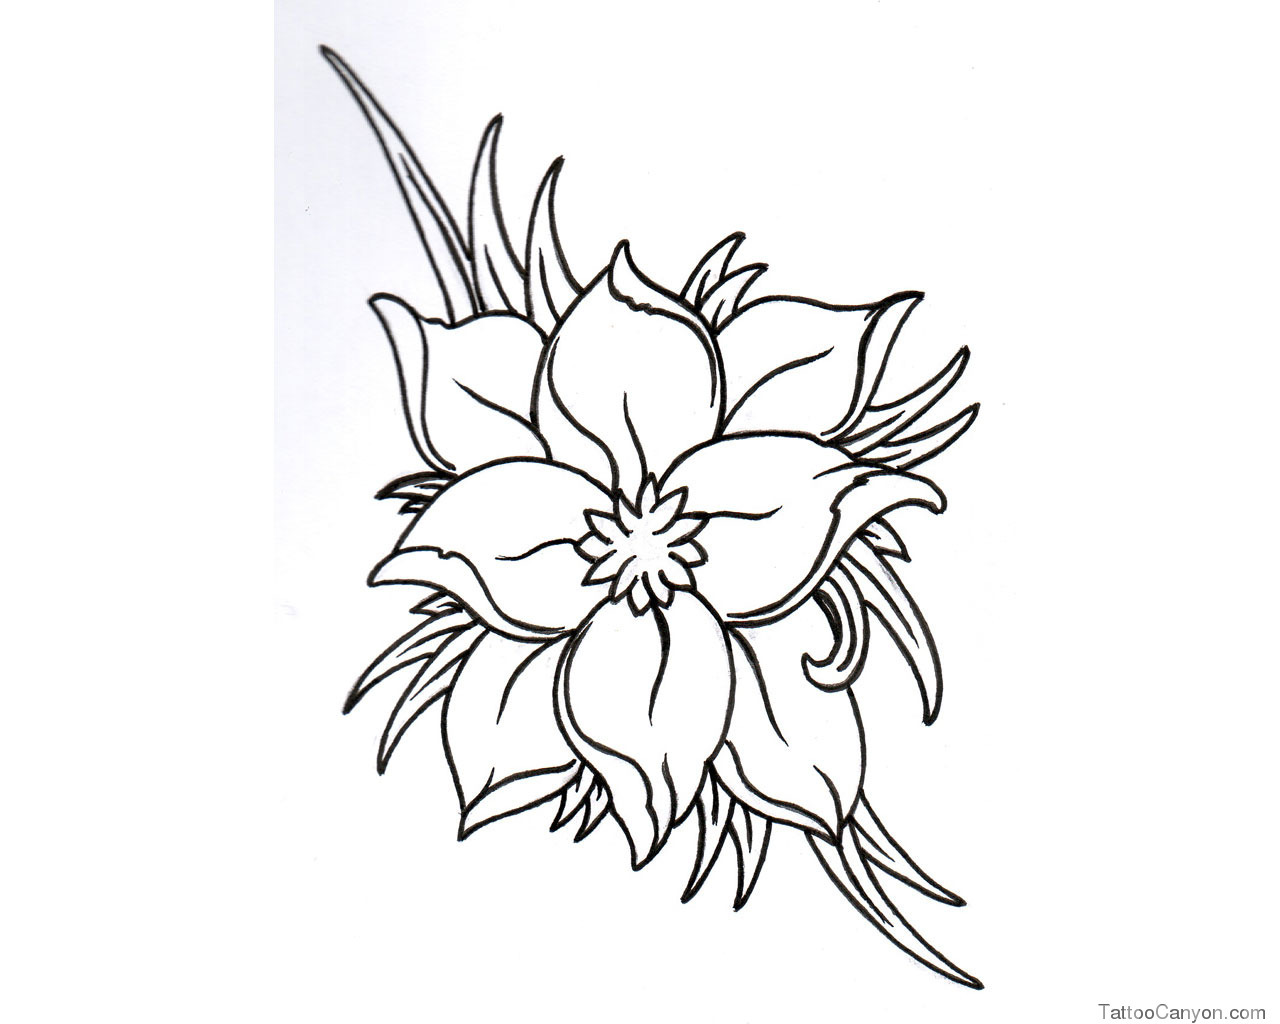 Black and White Flower Tattoo Designs - wide 10